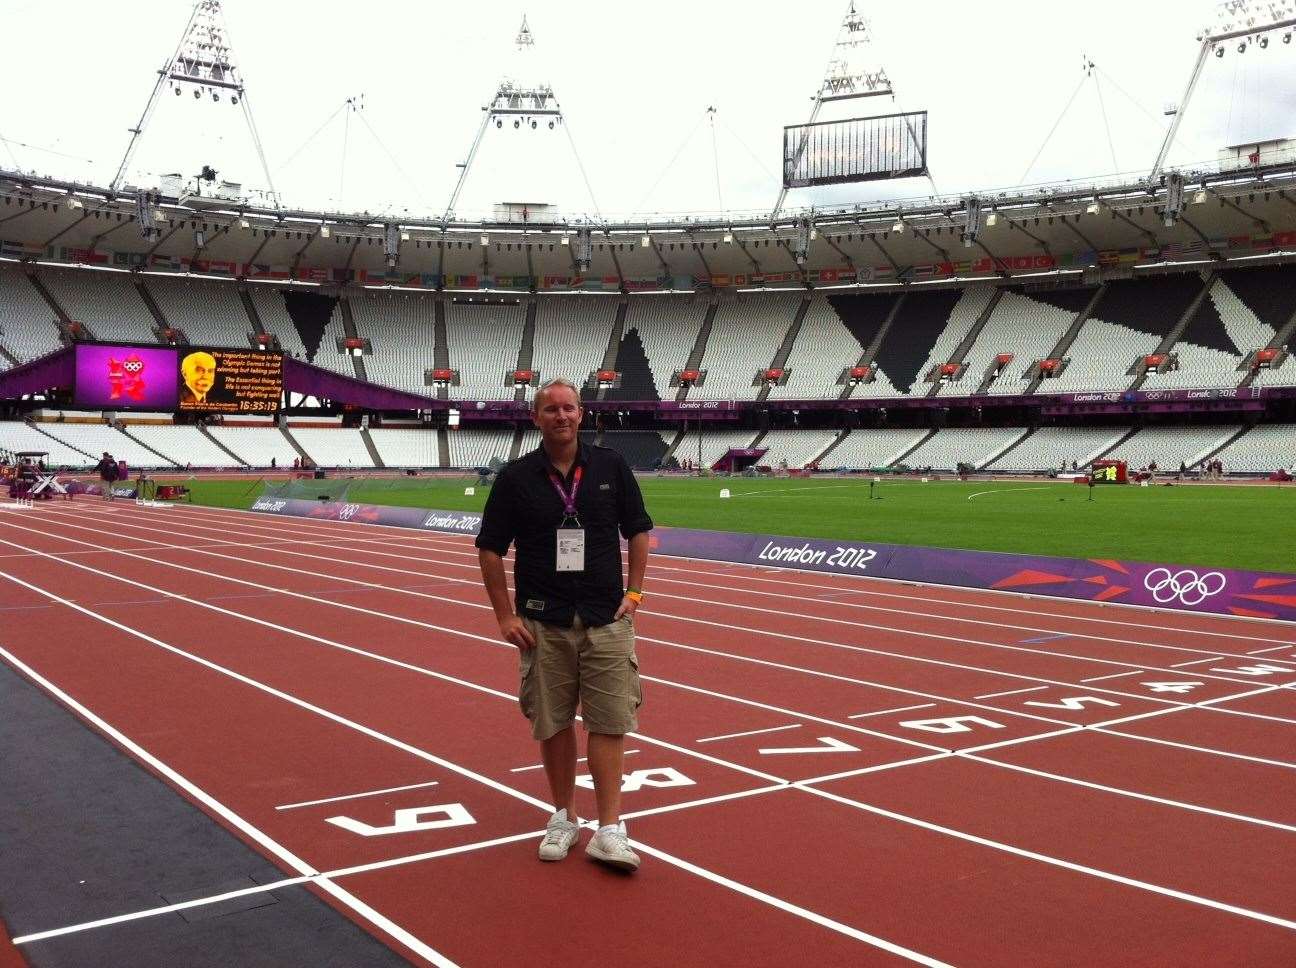 Alex Hoad covered the 2012 Olympics for the KM Group and KMFM